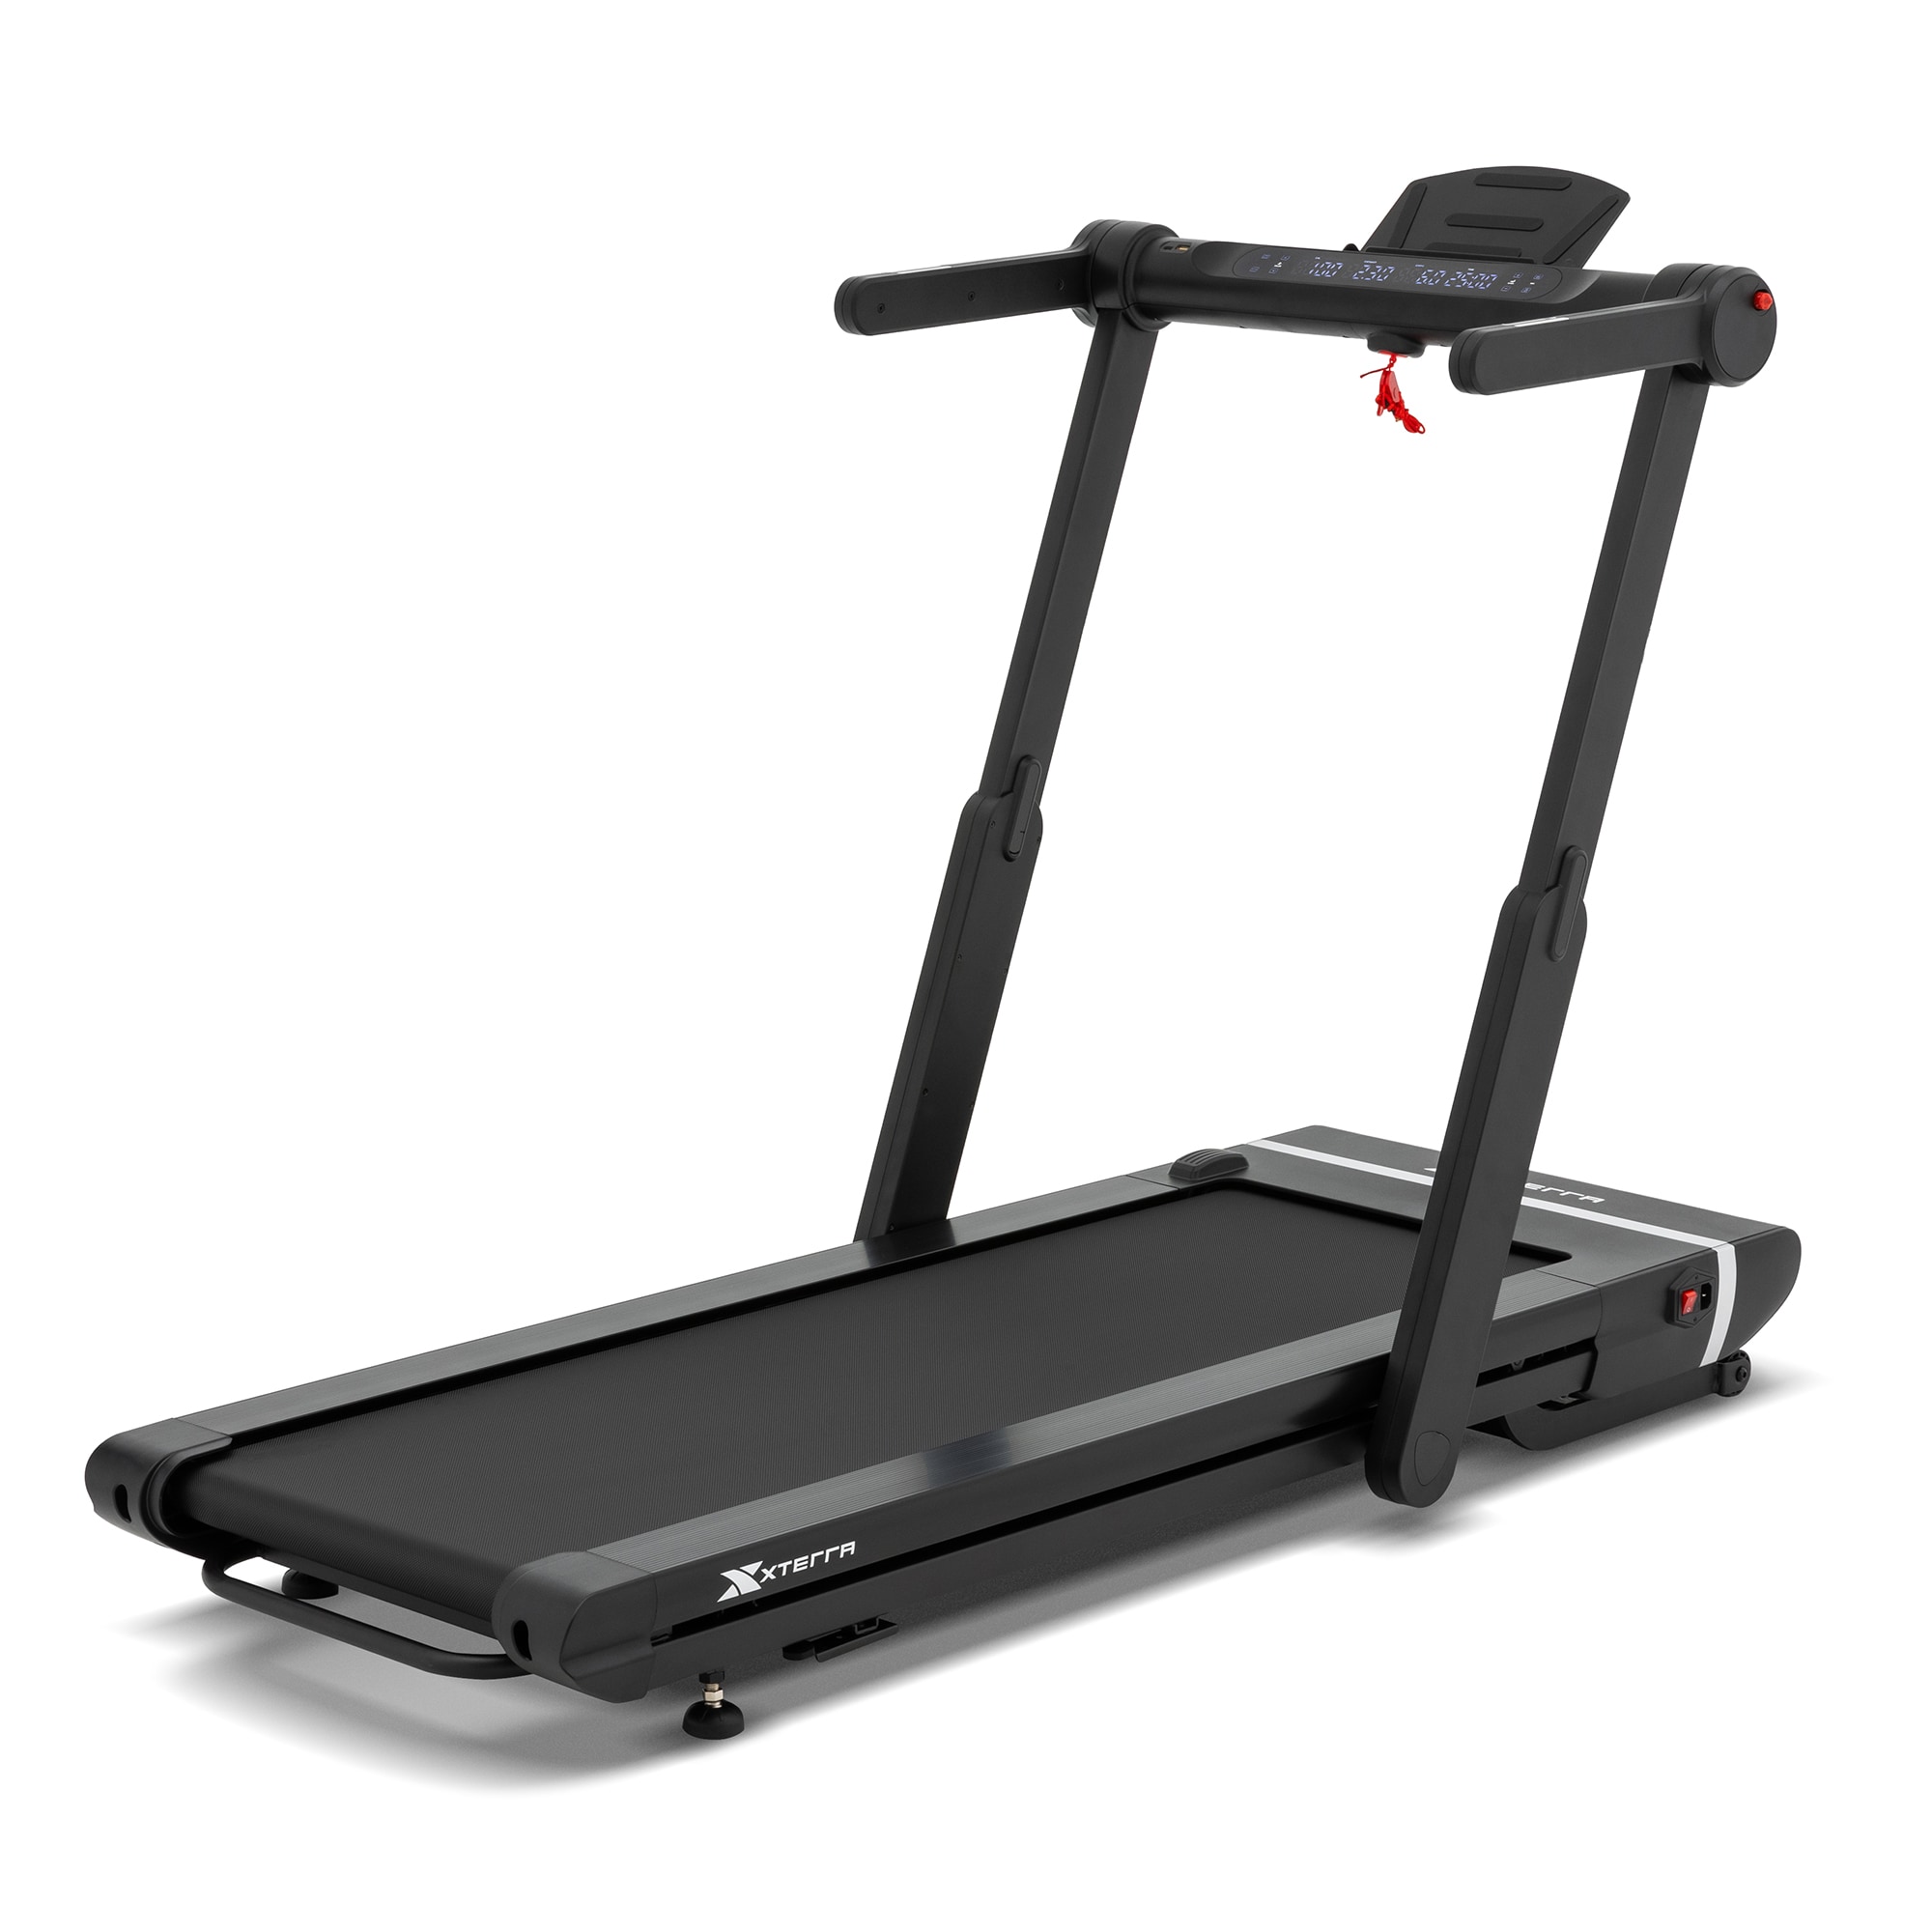 Foldable treadmill is a convenient and versatile piece of exercise equipment that allows you to enjoy the benefits of walking,